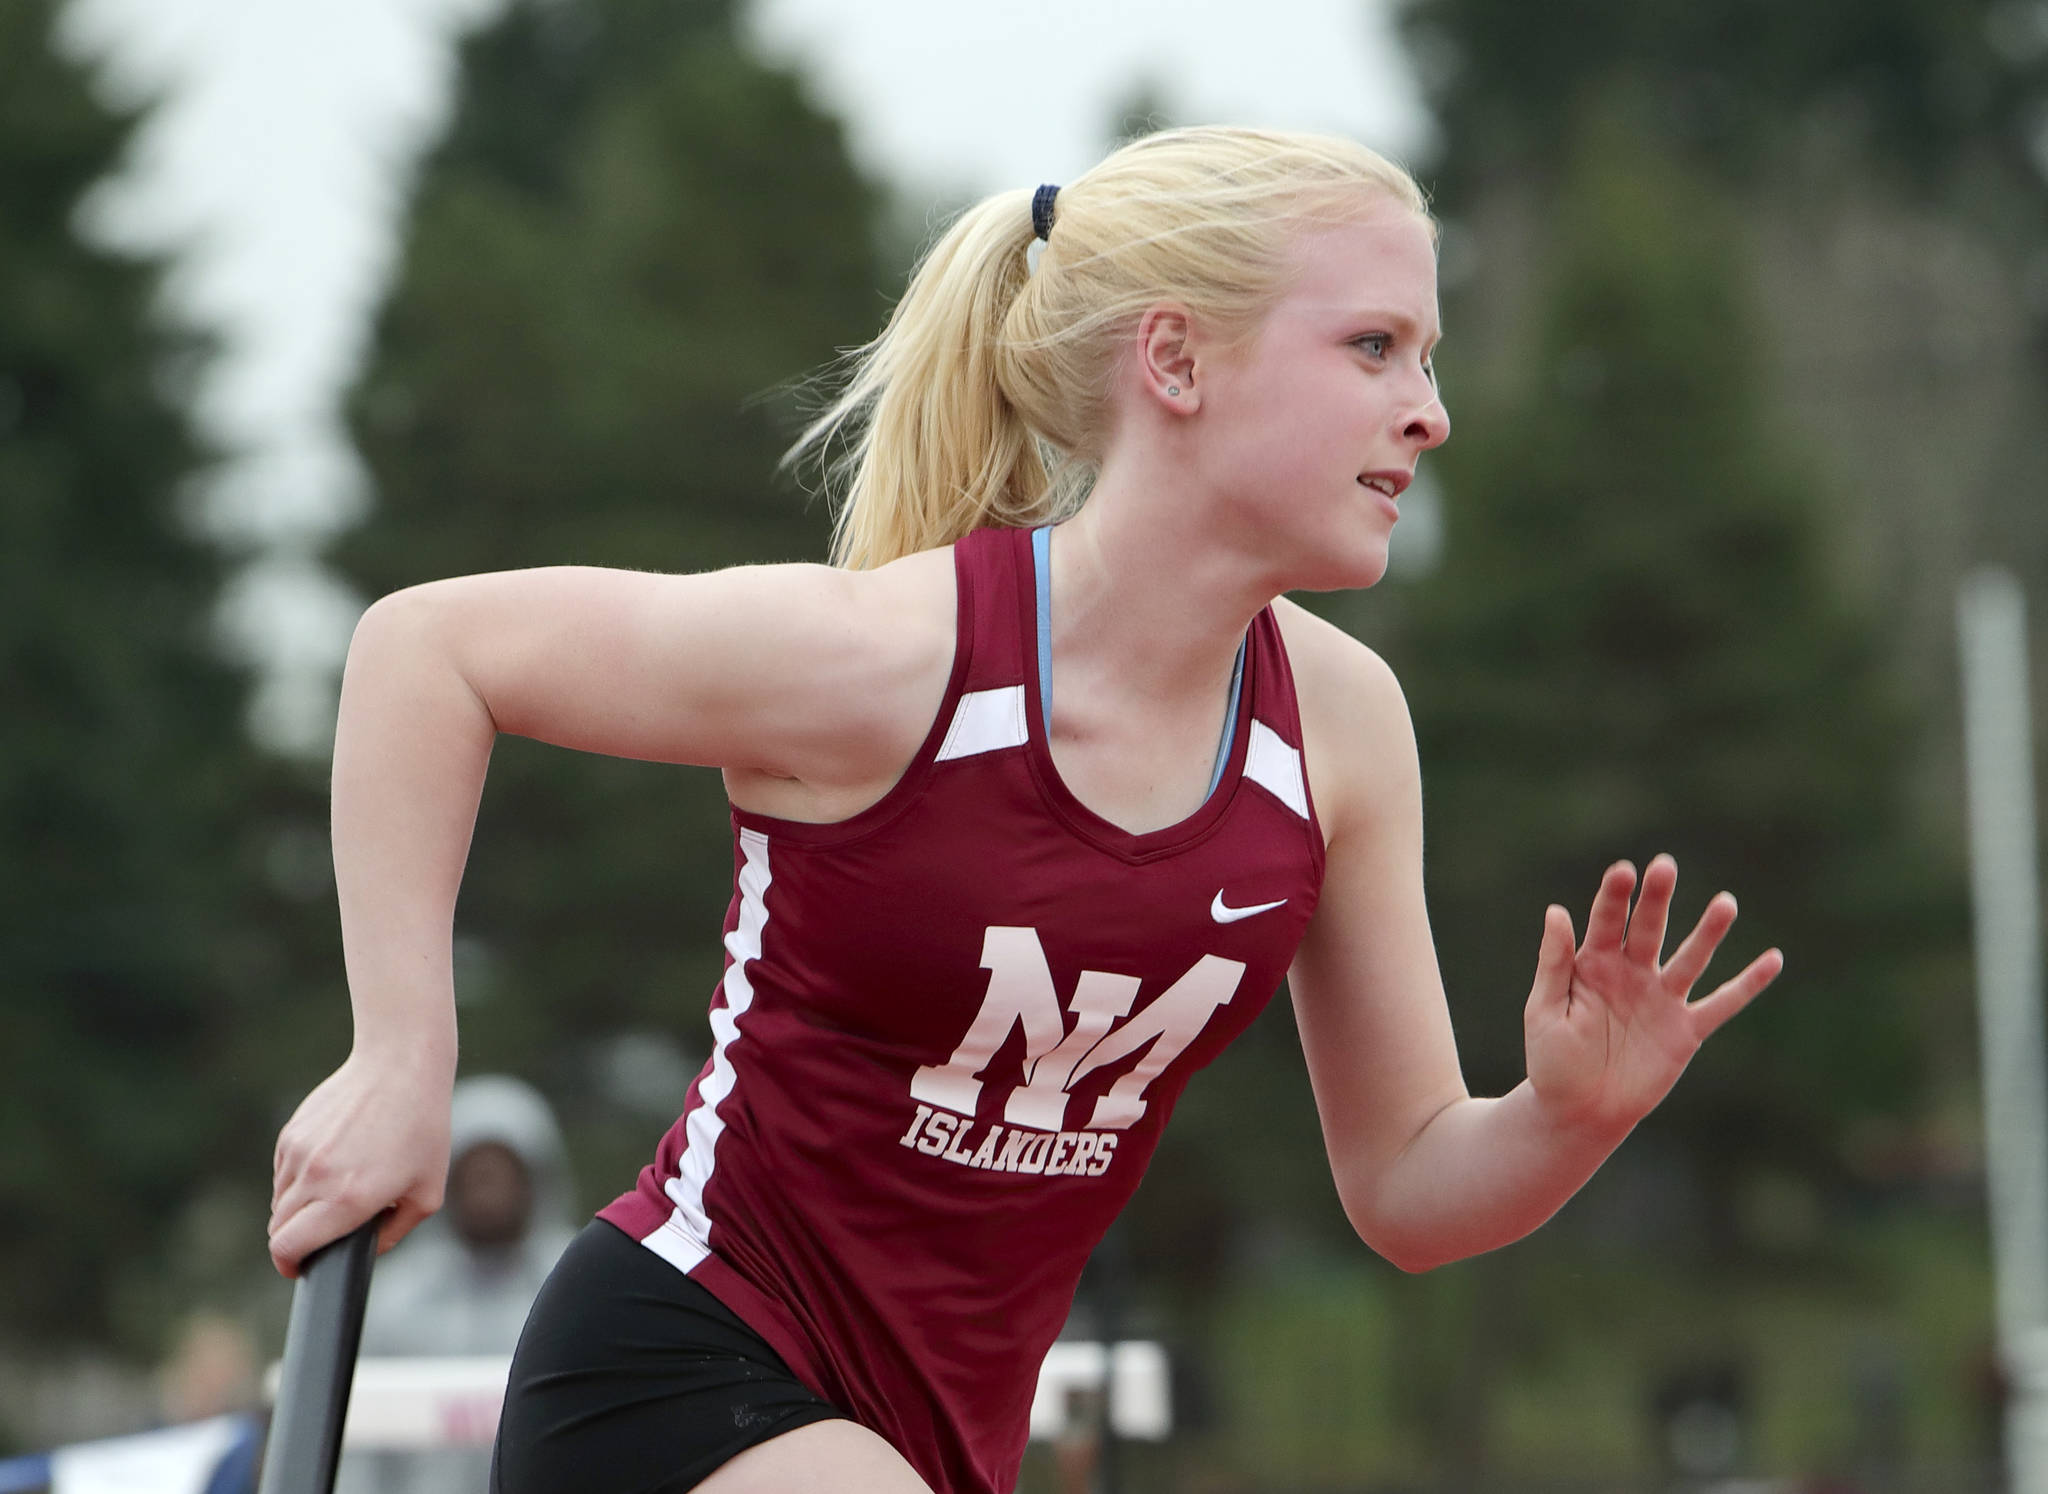 Photo courtesy of Jay Na                                The Mercer Island Islanders girls track team earned a 84-65 victory against the Liberty Patriots on April 5. The Islanders improved their overall record to 5-0 with the victory. Islanders athletes earning first place in their respective events consisted of Gretchen Blohm (200, 400 relay, 800 relay, 1600 relay), Margaret Baker (400, 800 relay, 1600 relay), Chloe Michaels (1600, 3200), Maya Virdell (300 hurdles, 400 relay, 800 relay, 1600 relay), Eliza Crenshaw (400 relay, 800 relay), Katie McCormick (400 relay, high jump), Ella Hensey (1600 relay, long jump), Faith Osei-Tutu (shot-put) and Aleksandra Kogalovski (pole vault). Crenshaw (pictured) competes in the 800-meter relay against Liberty.